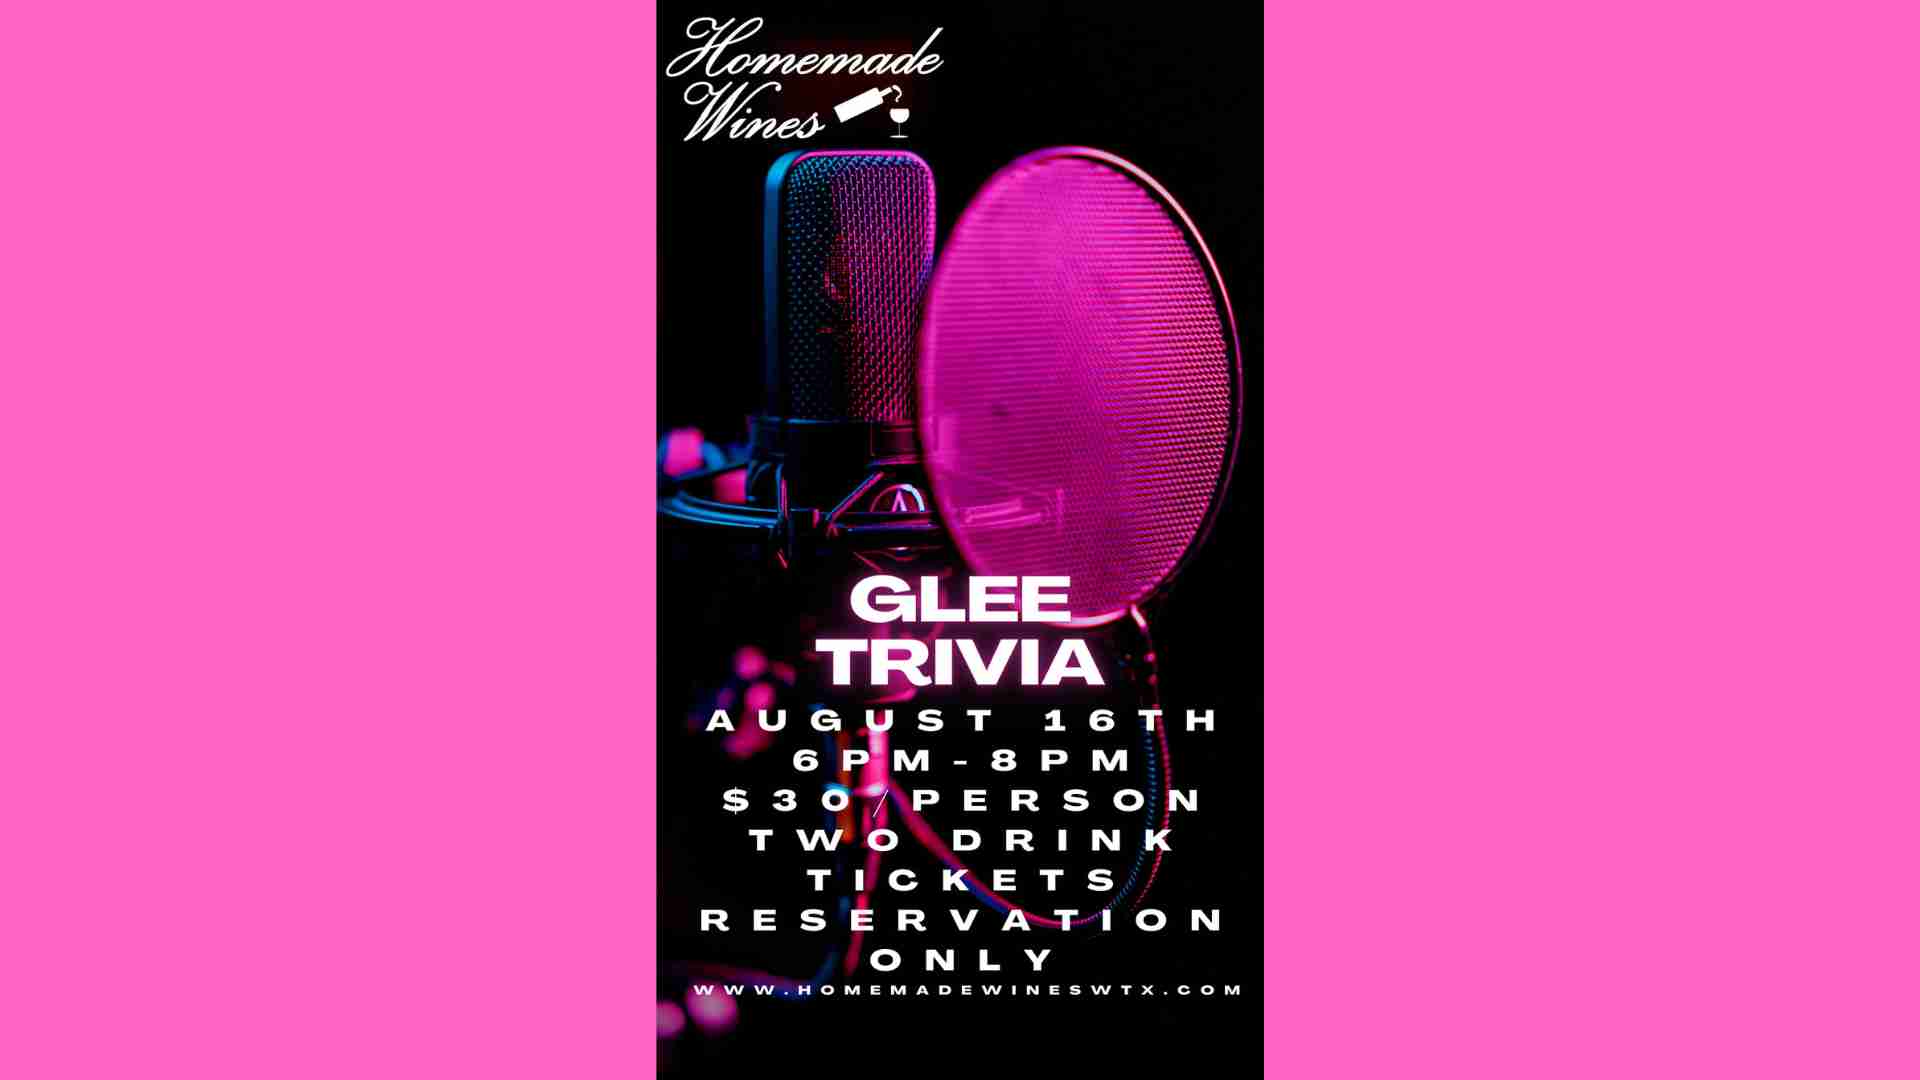 Glee Trivia at Homemade Wines on Aug. 16, 2023 in Odessa, TX.